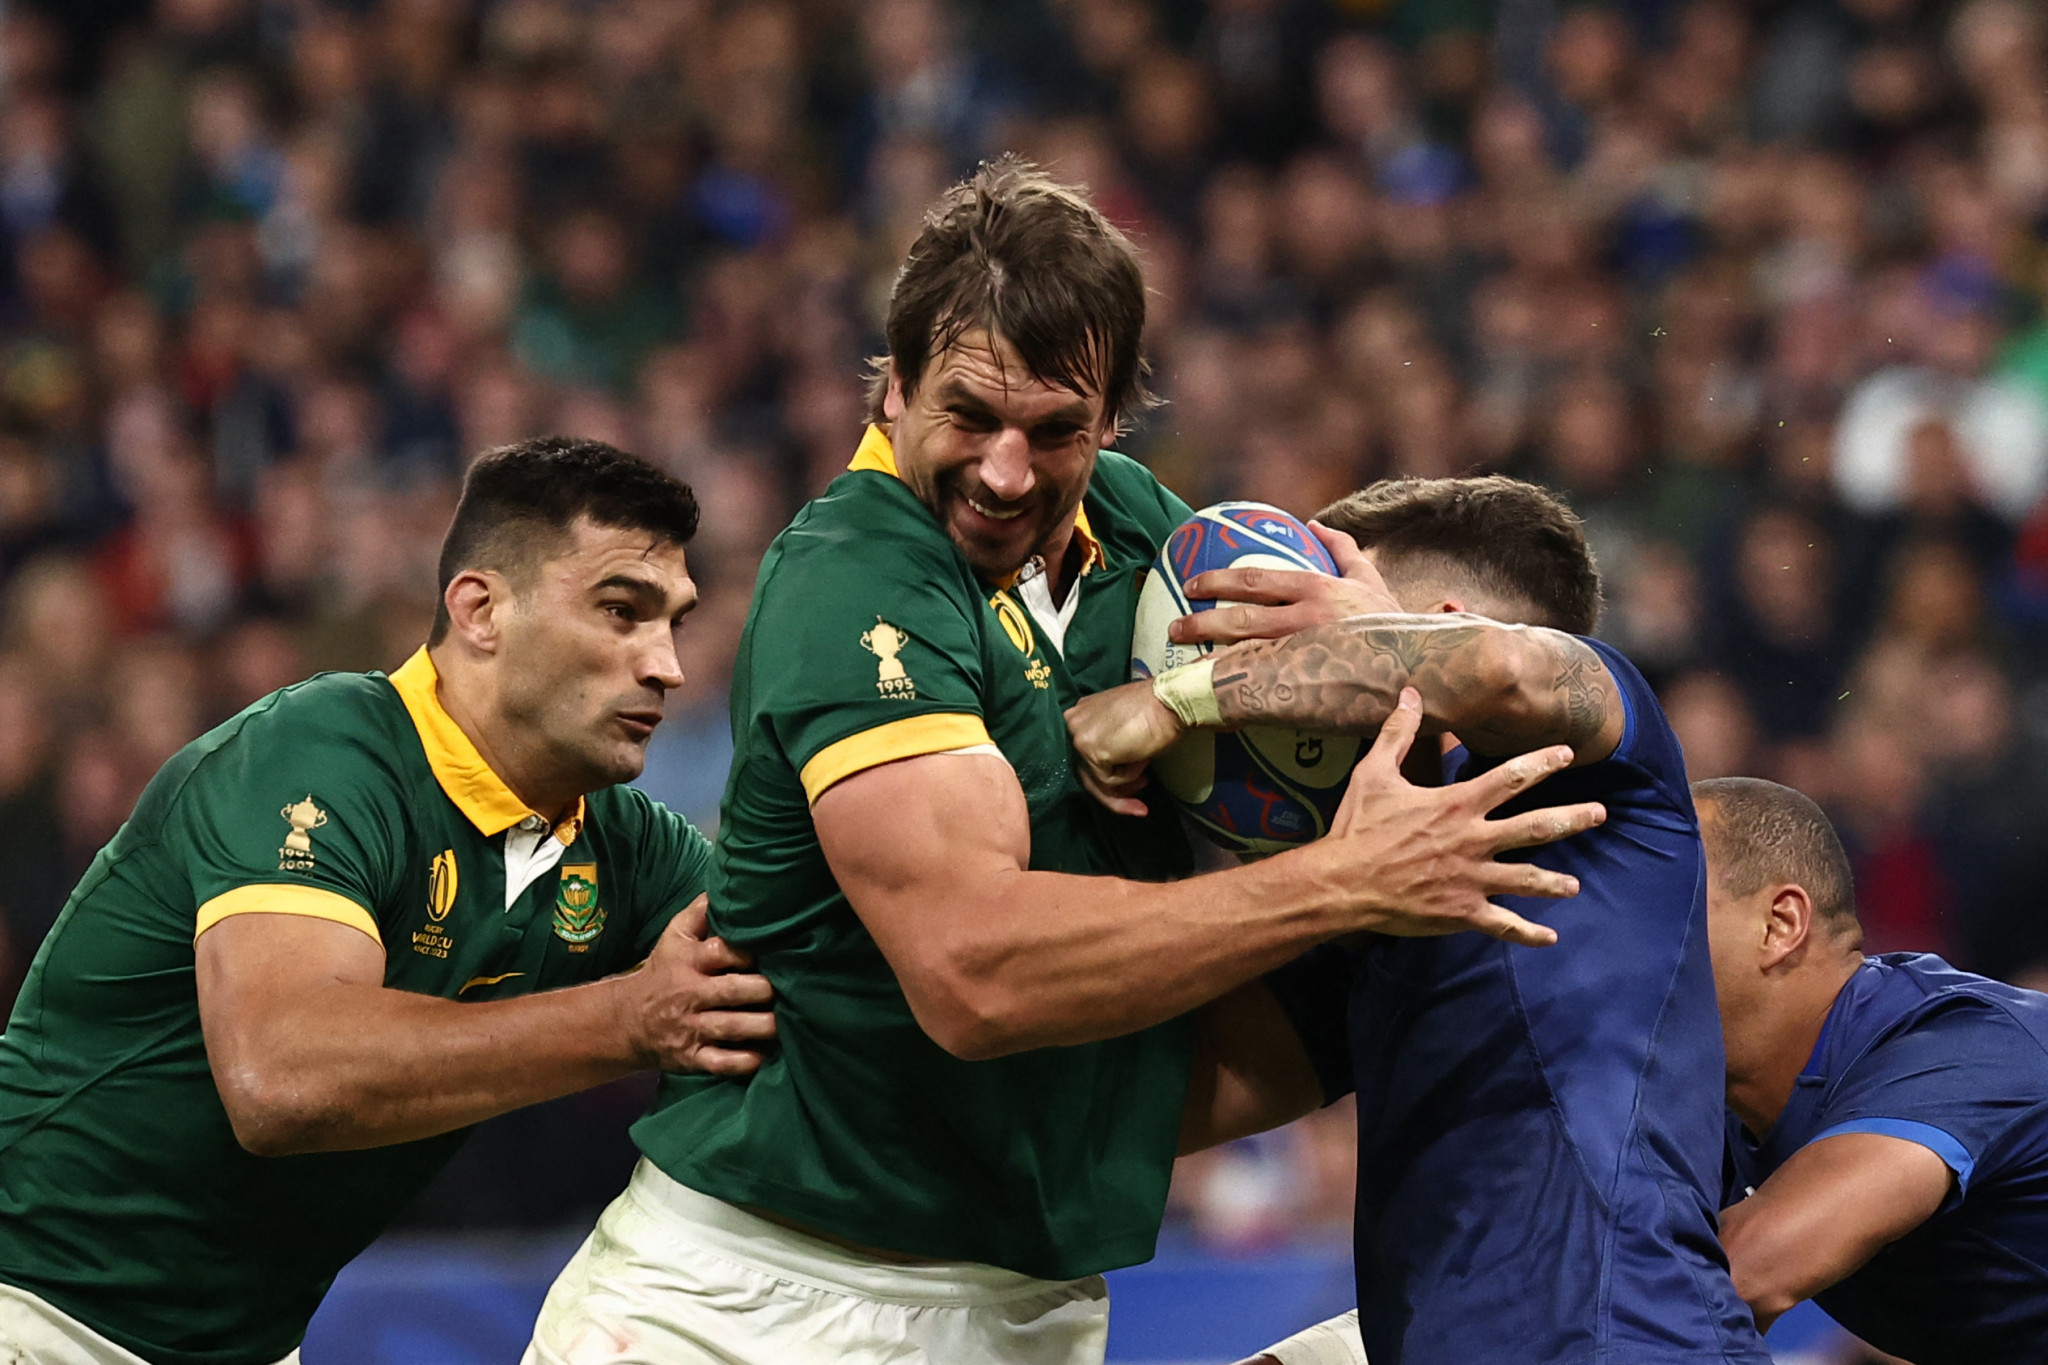 Eben Etzebeth's converted try gave South Africa the crucial lead late on ©Getty Images